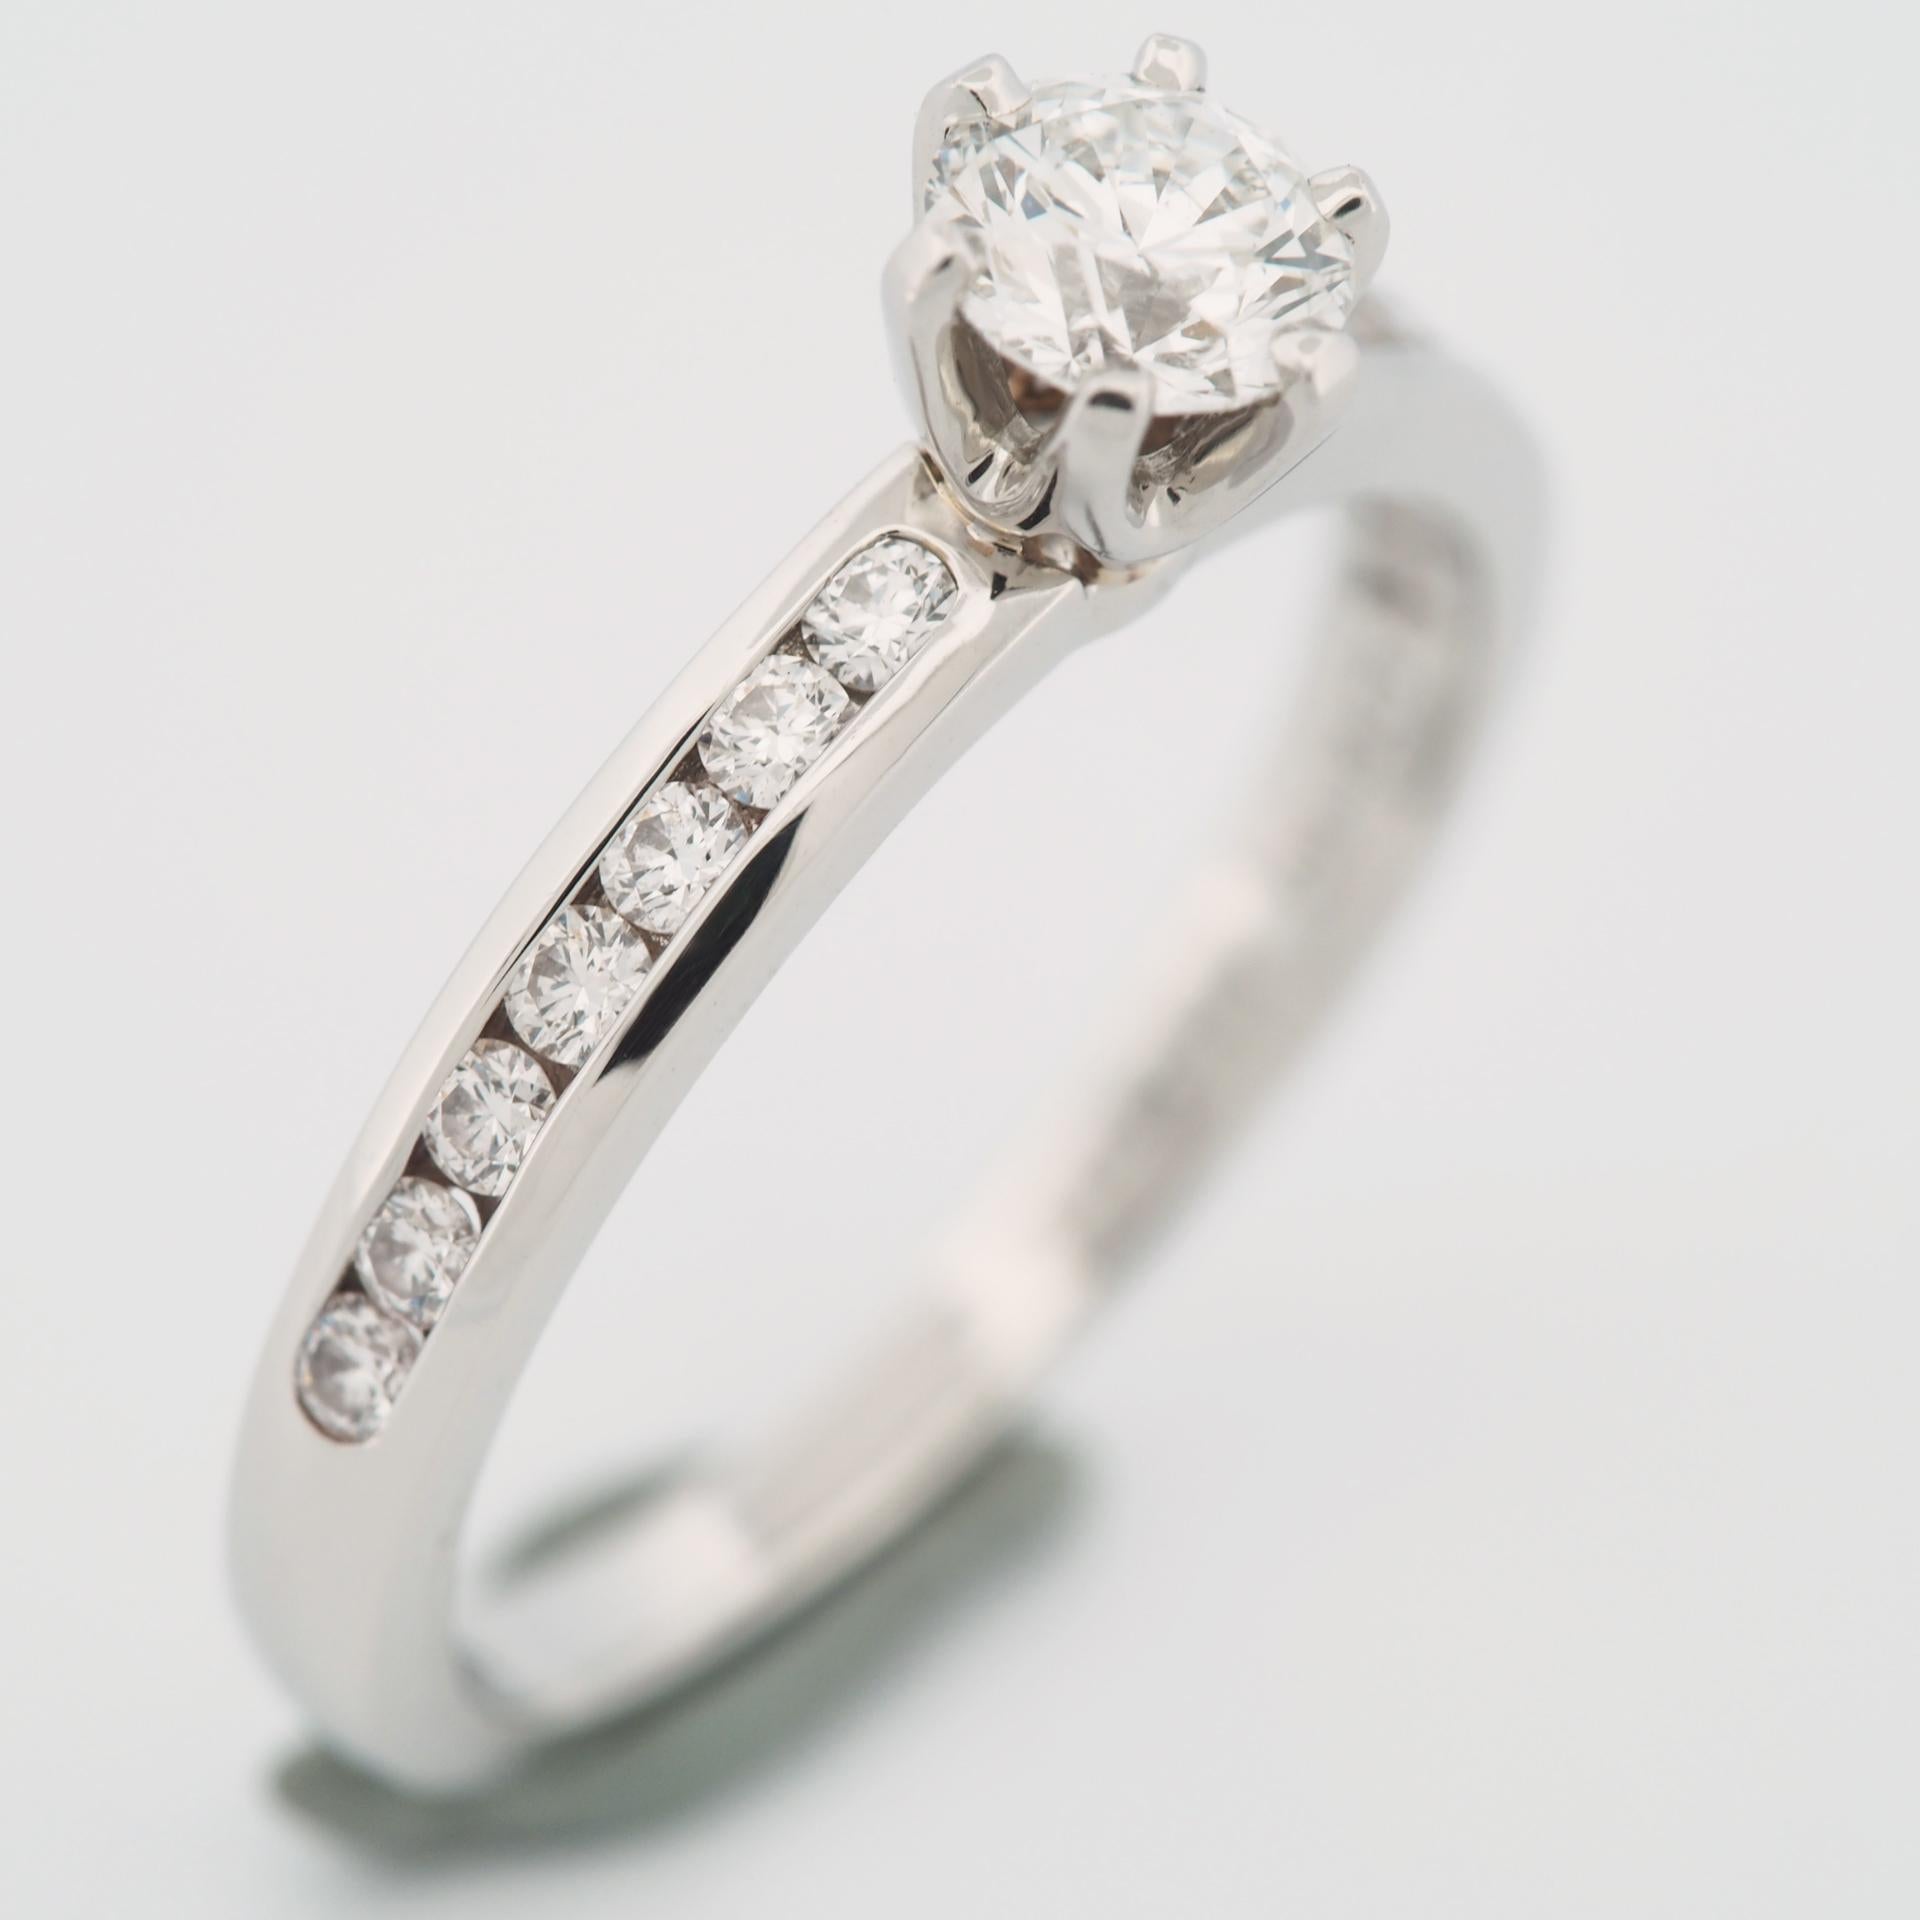 Tiffany 0.38 Carat Solitaire Diamond Ring PT950 with Channel Set Diamonds For Sale 3